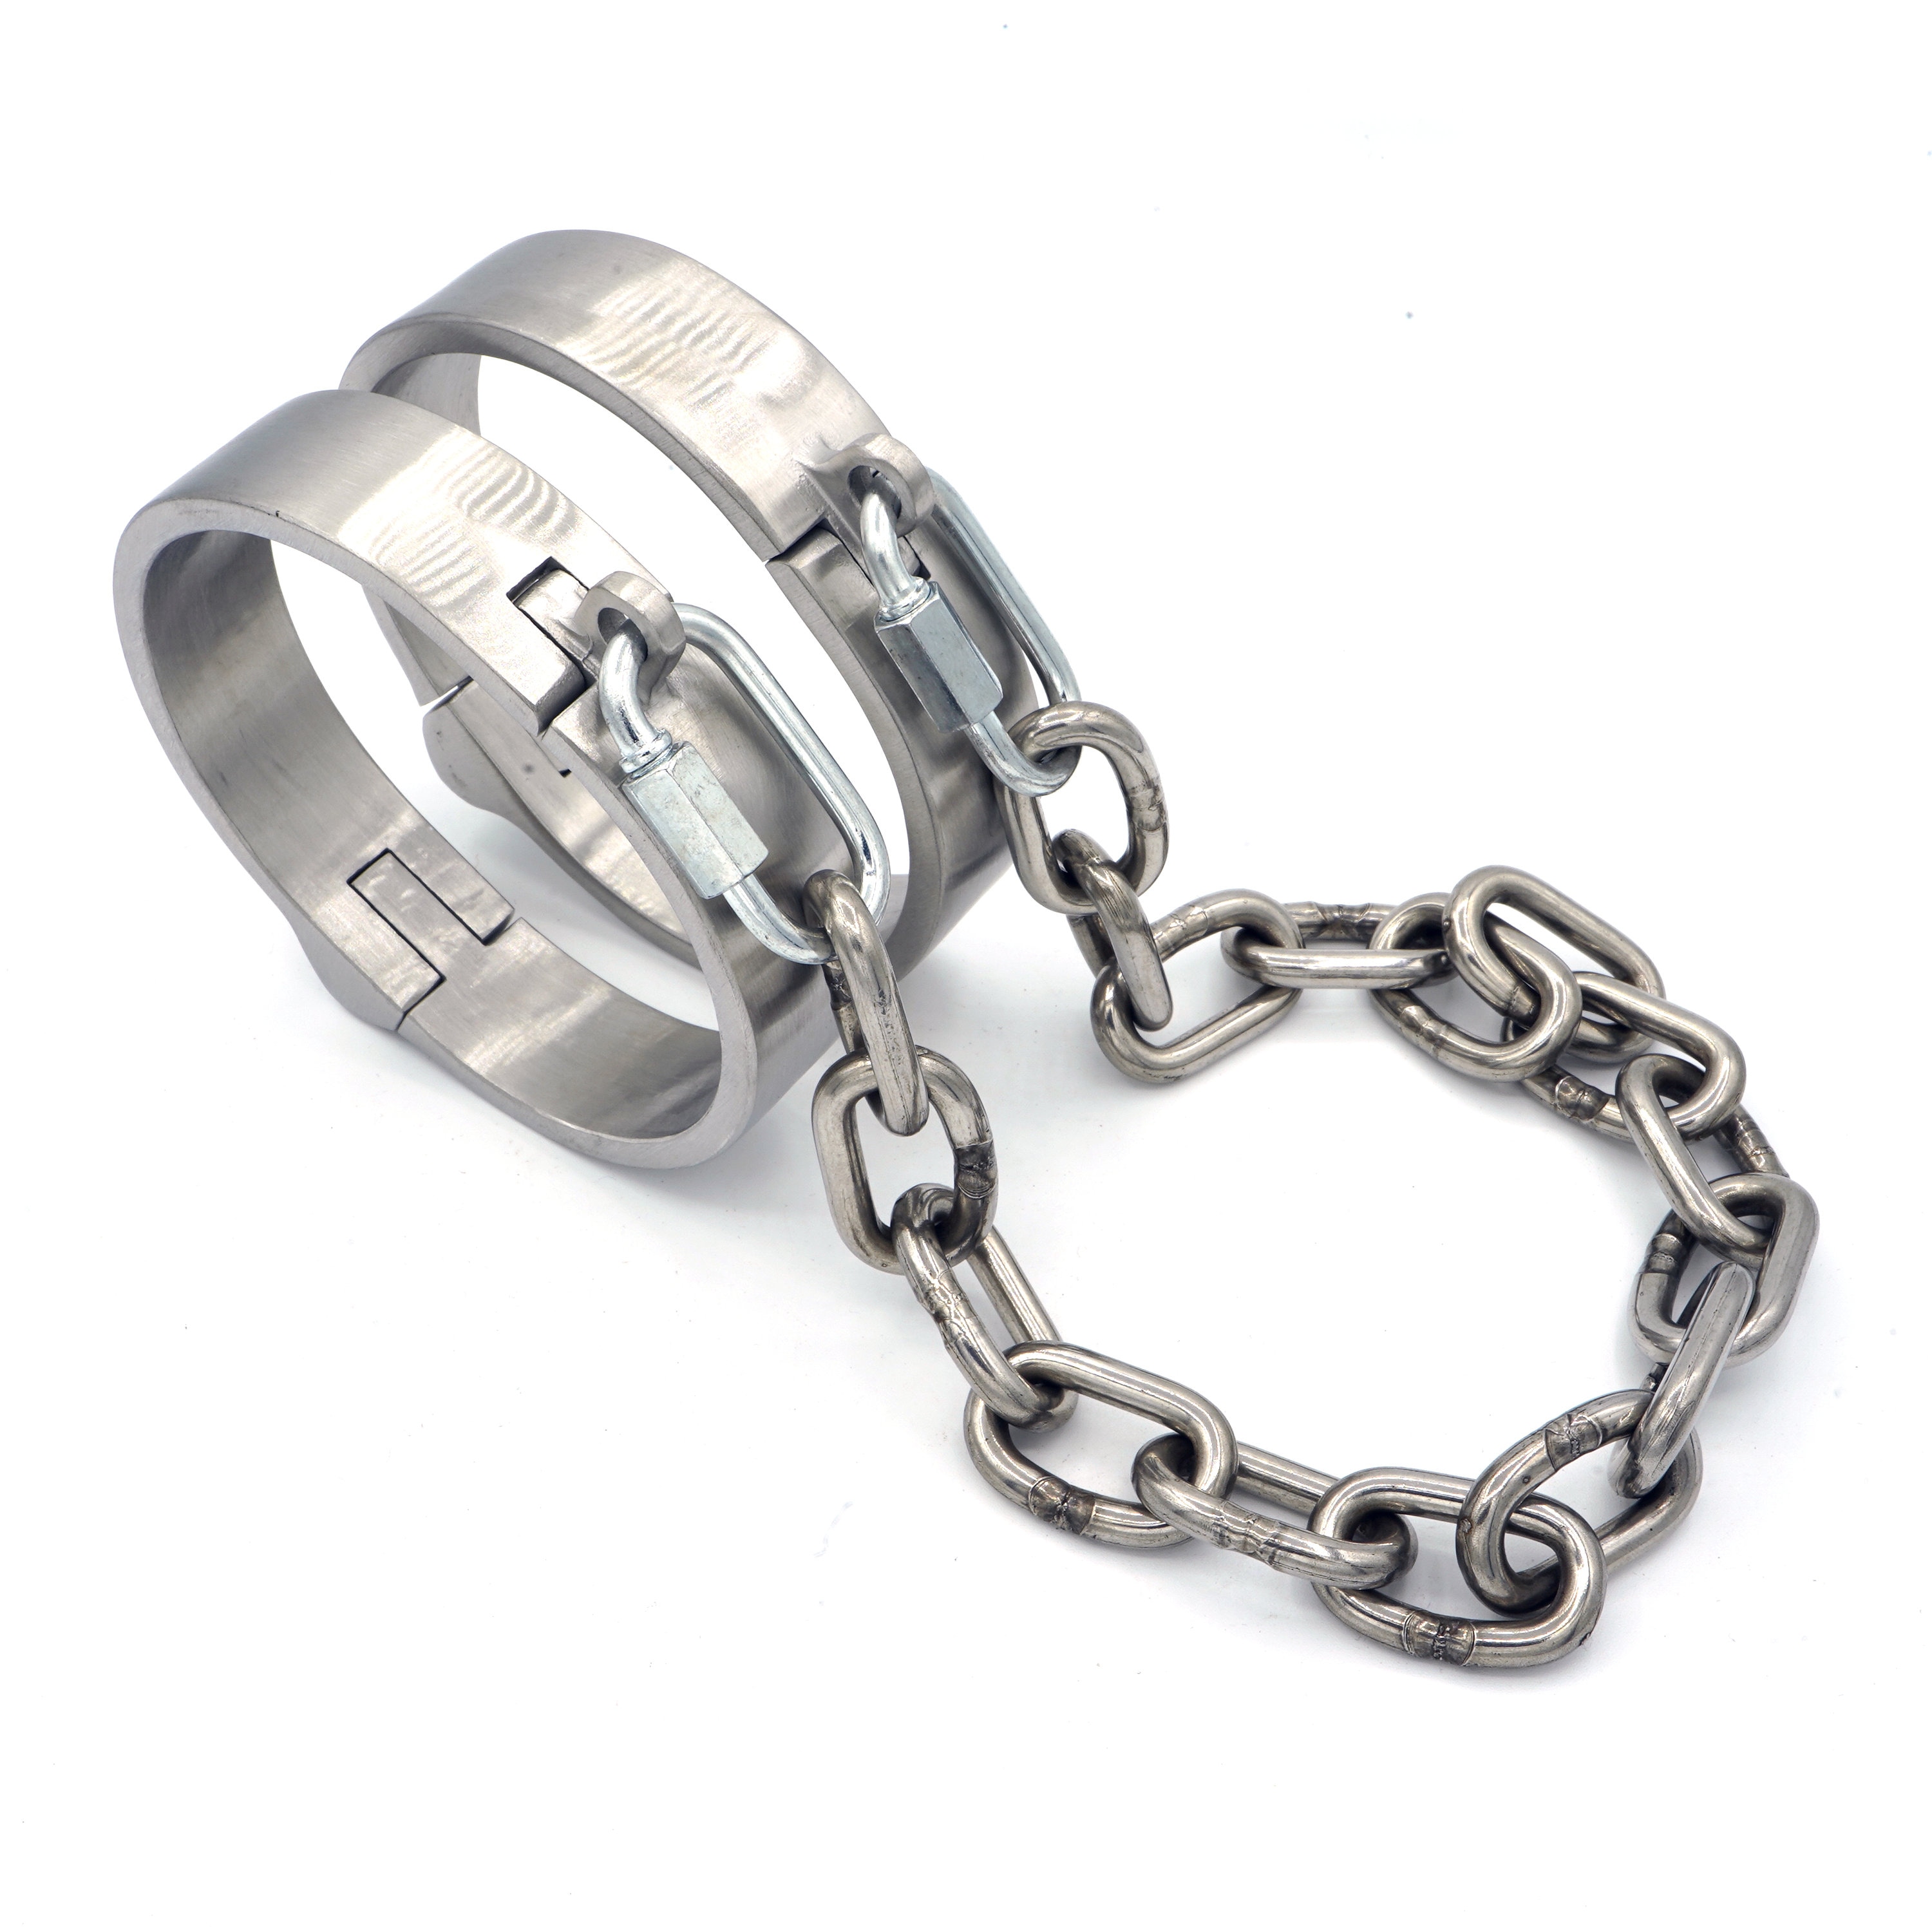 Heavy Stainless Steel Leg Irons With Chain Lockable - Etsy